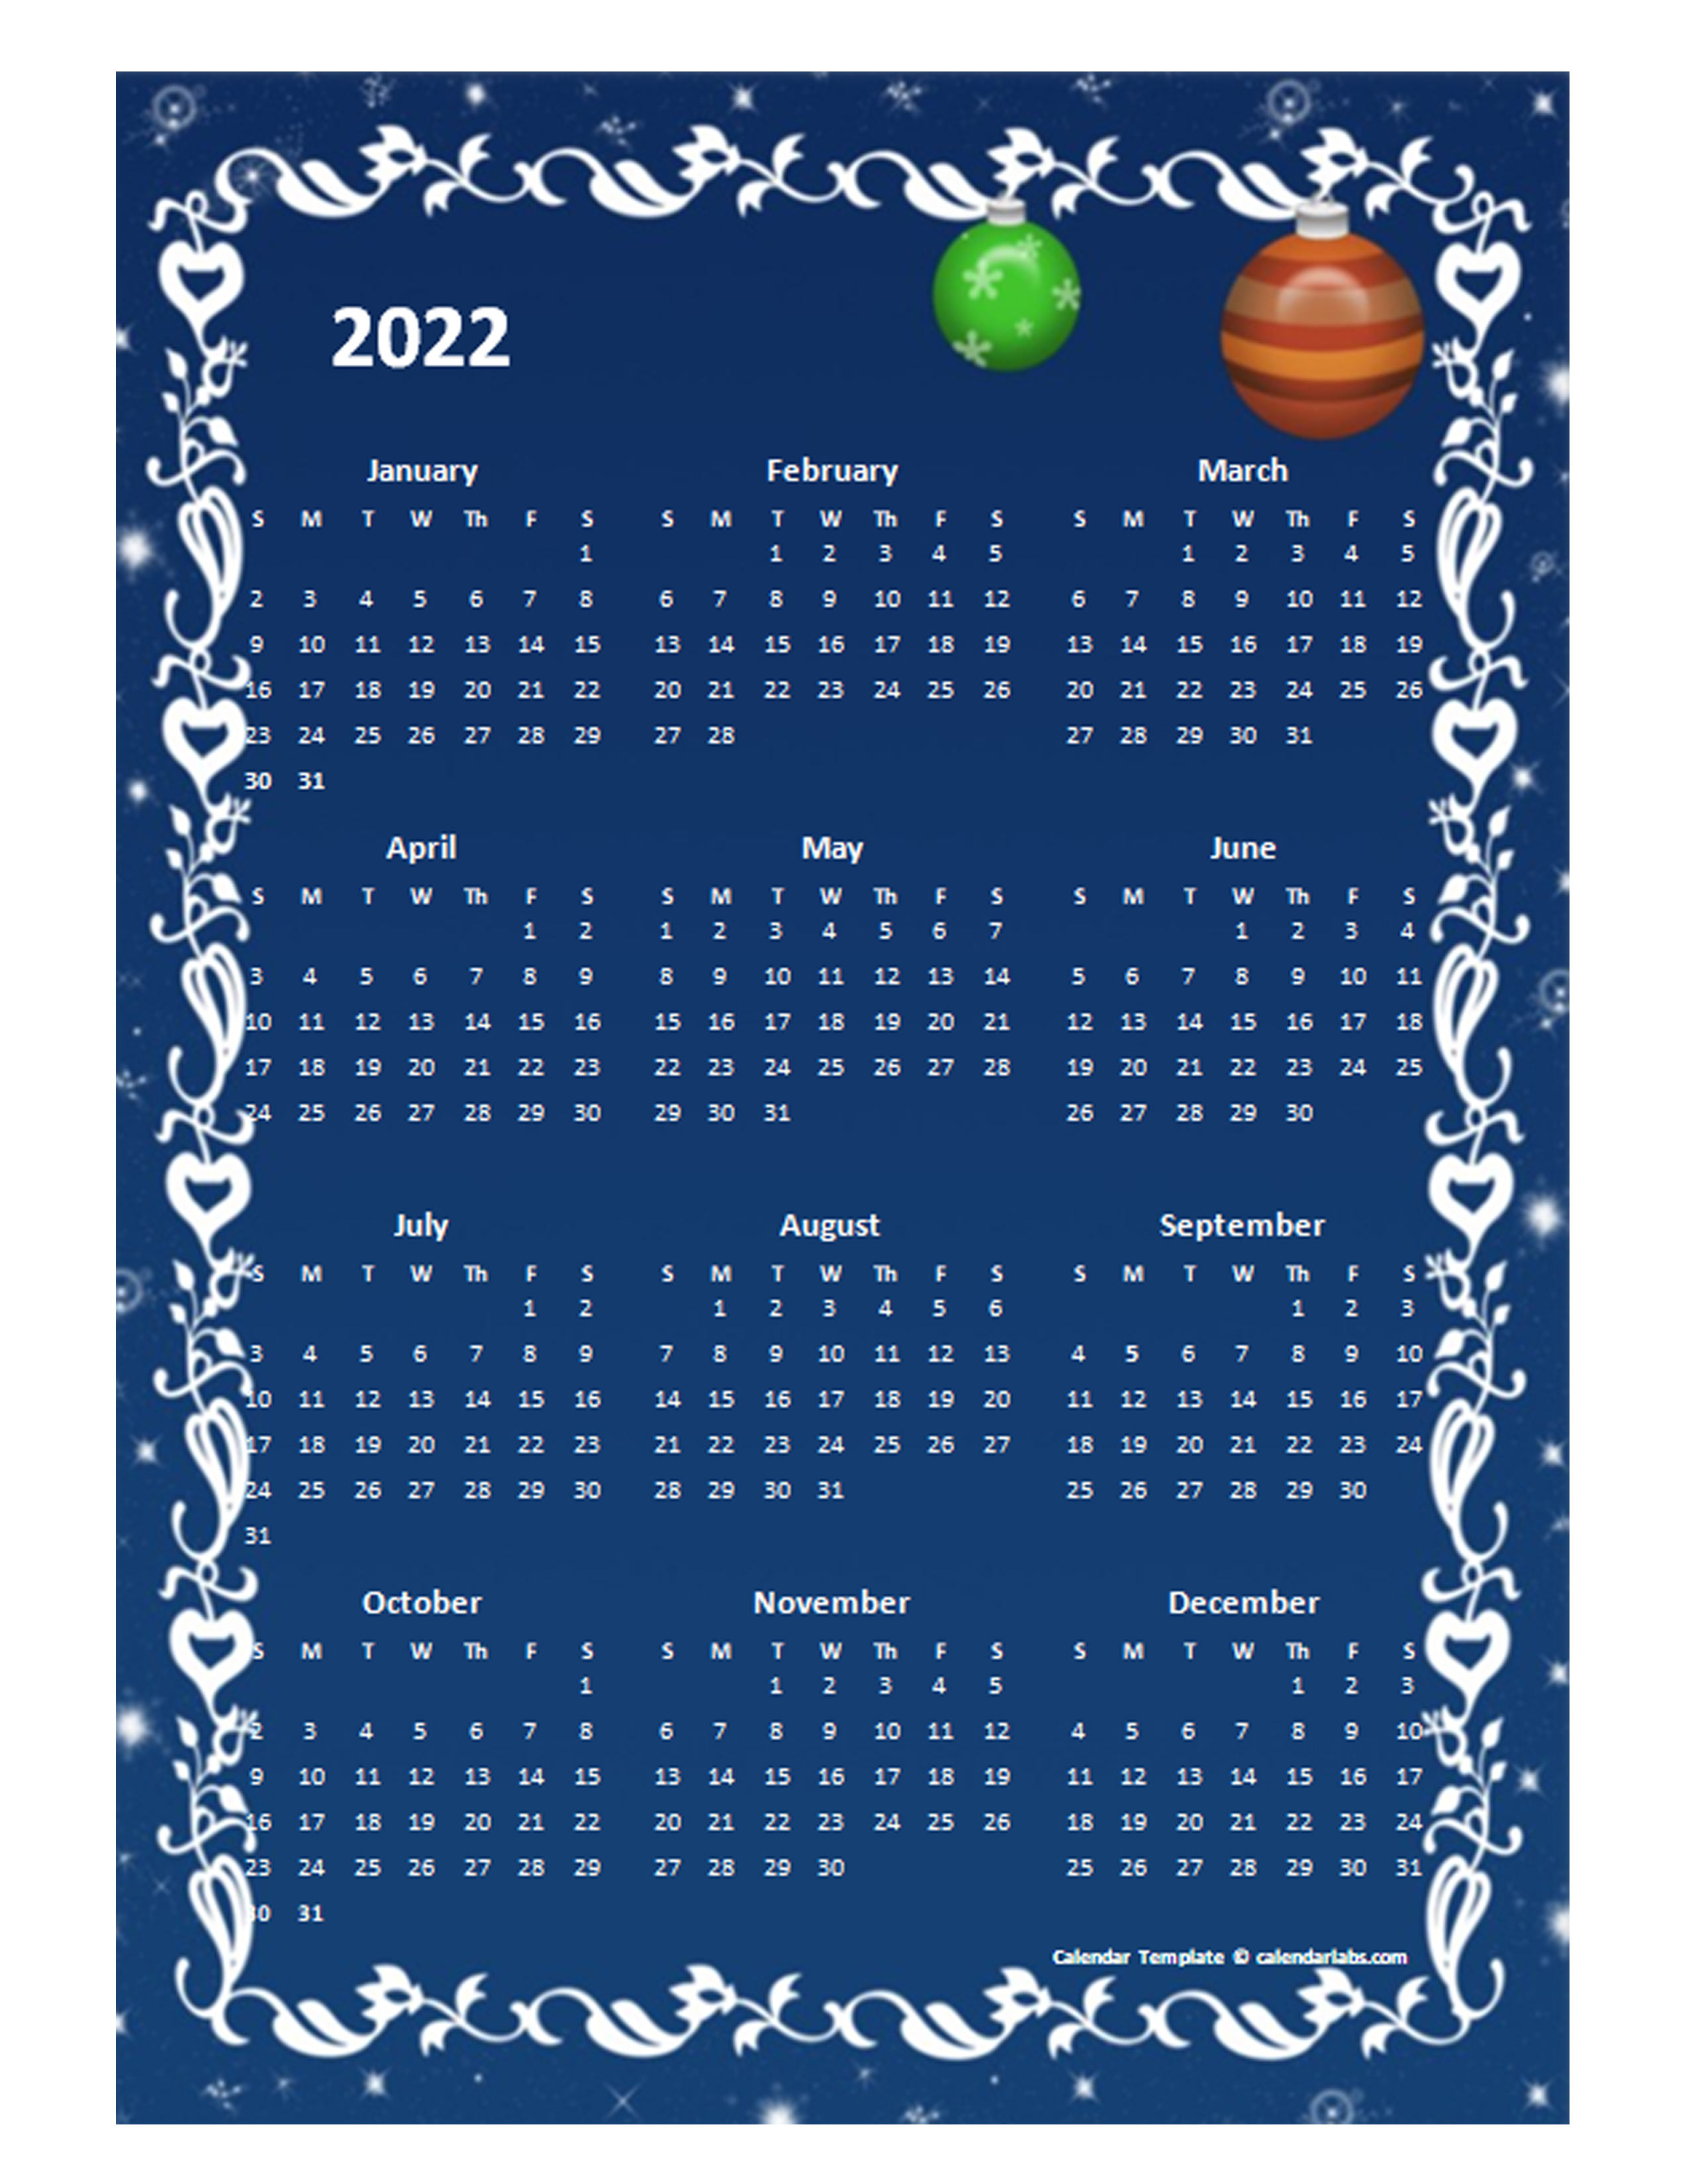 2022 Yearly Calendar Design Template - Free Printable Templates